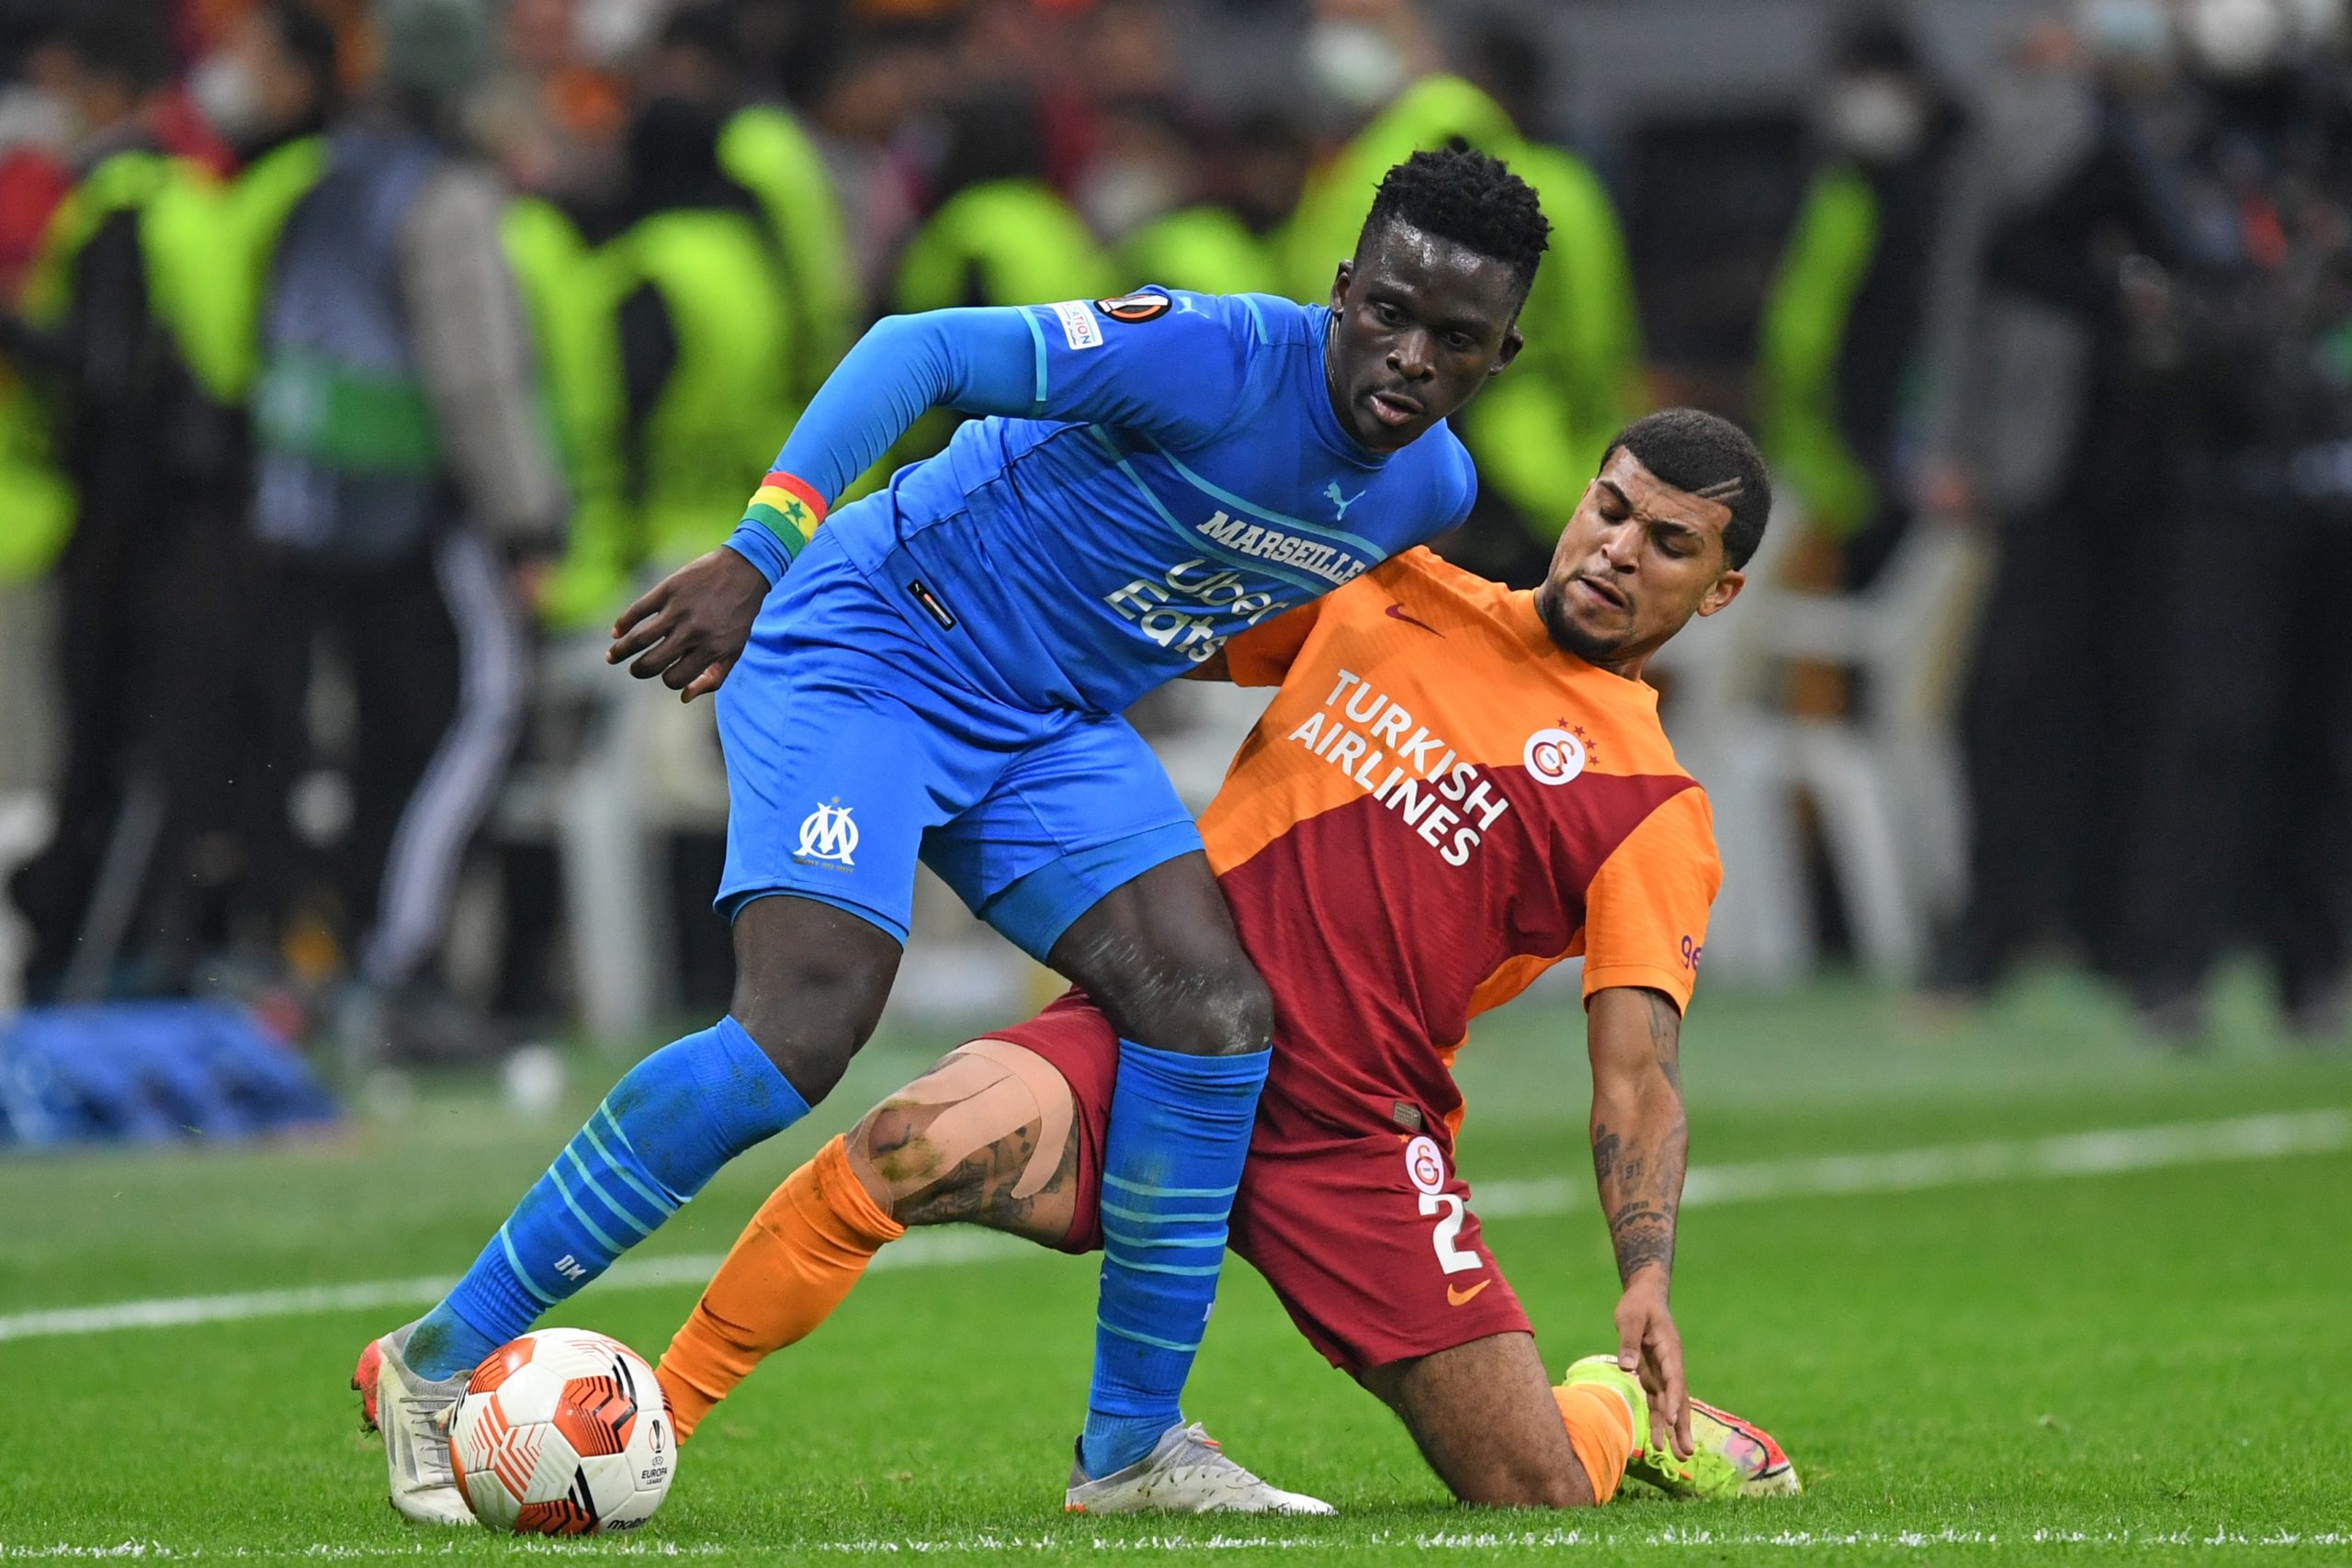 West Ham are eyeing move to sign Marseille striker Bamba Dieng before deadline day